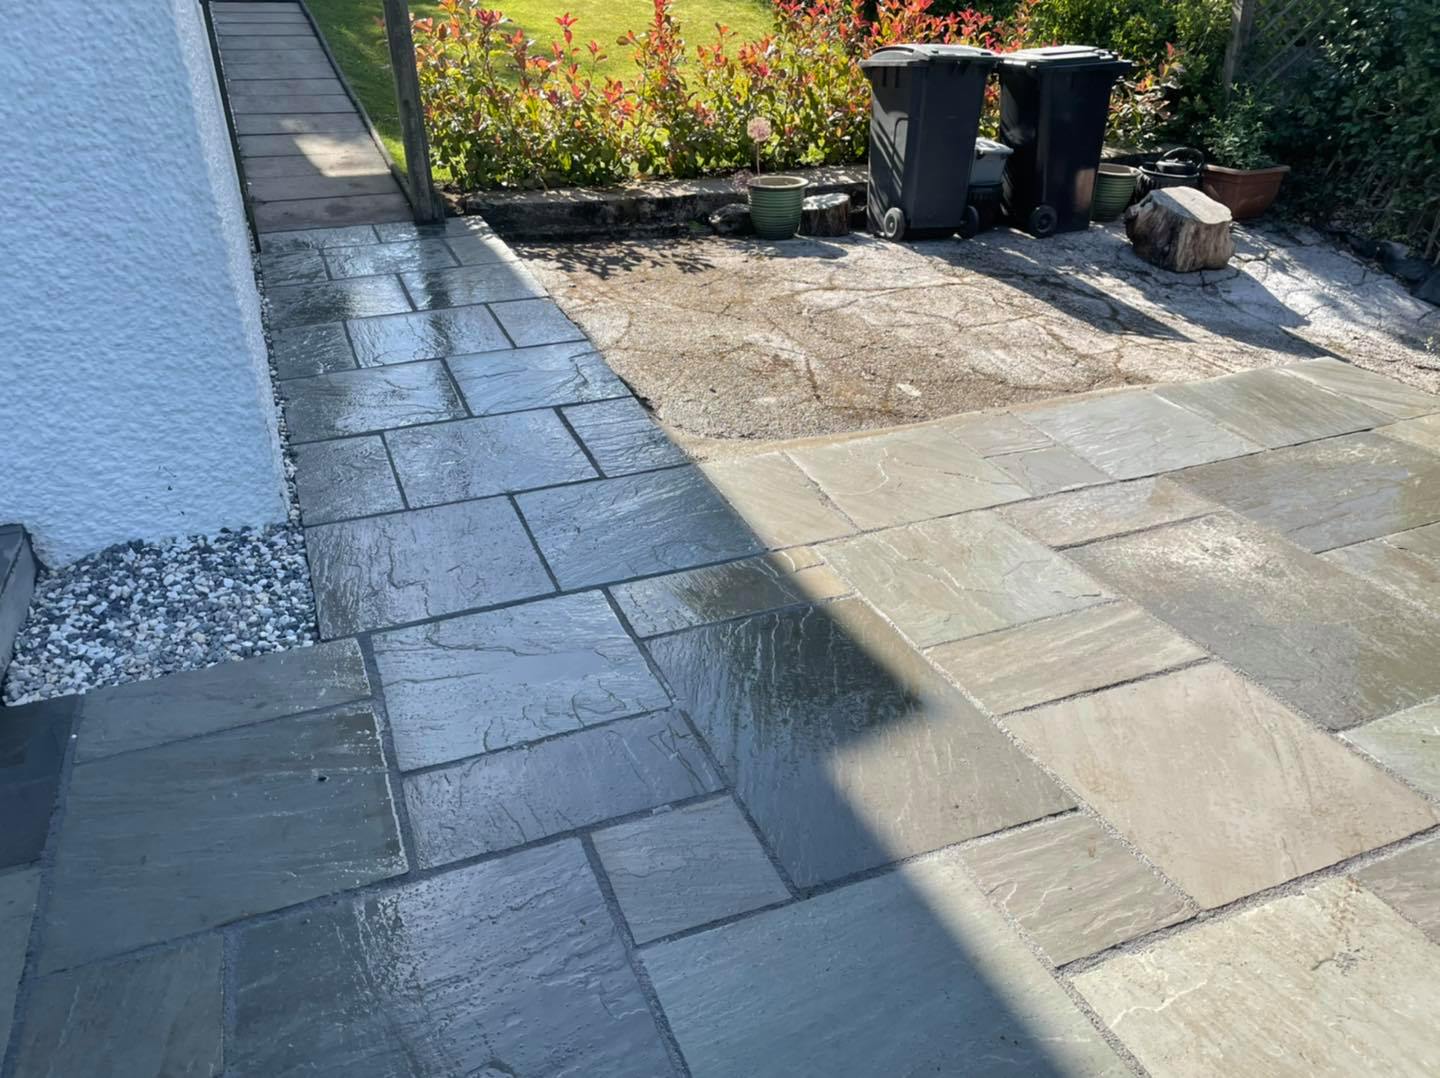 A little break from porcelain this week with an Indian sandstone installation,complimenting the character of the building and surroundings